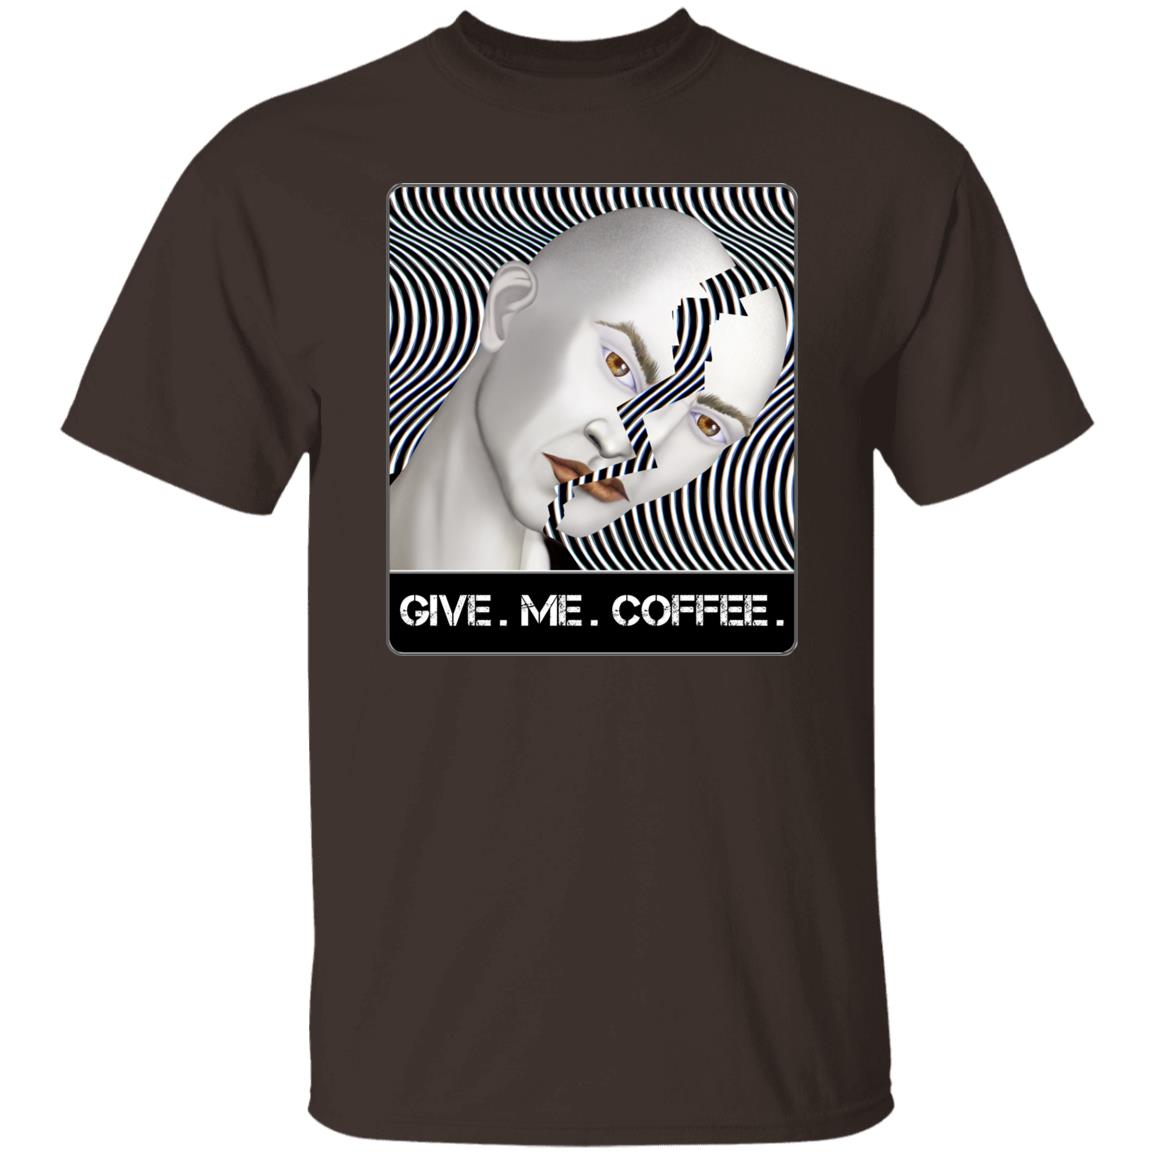 GIVE. ME. COFFEE. - Men's Classic Fit T-Shirt